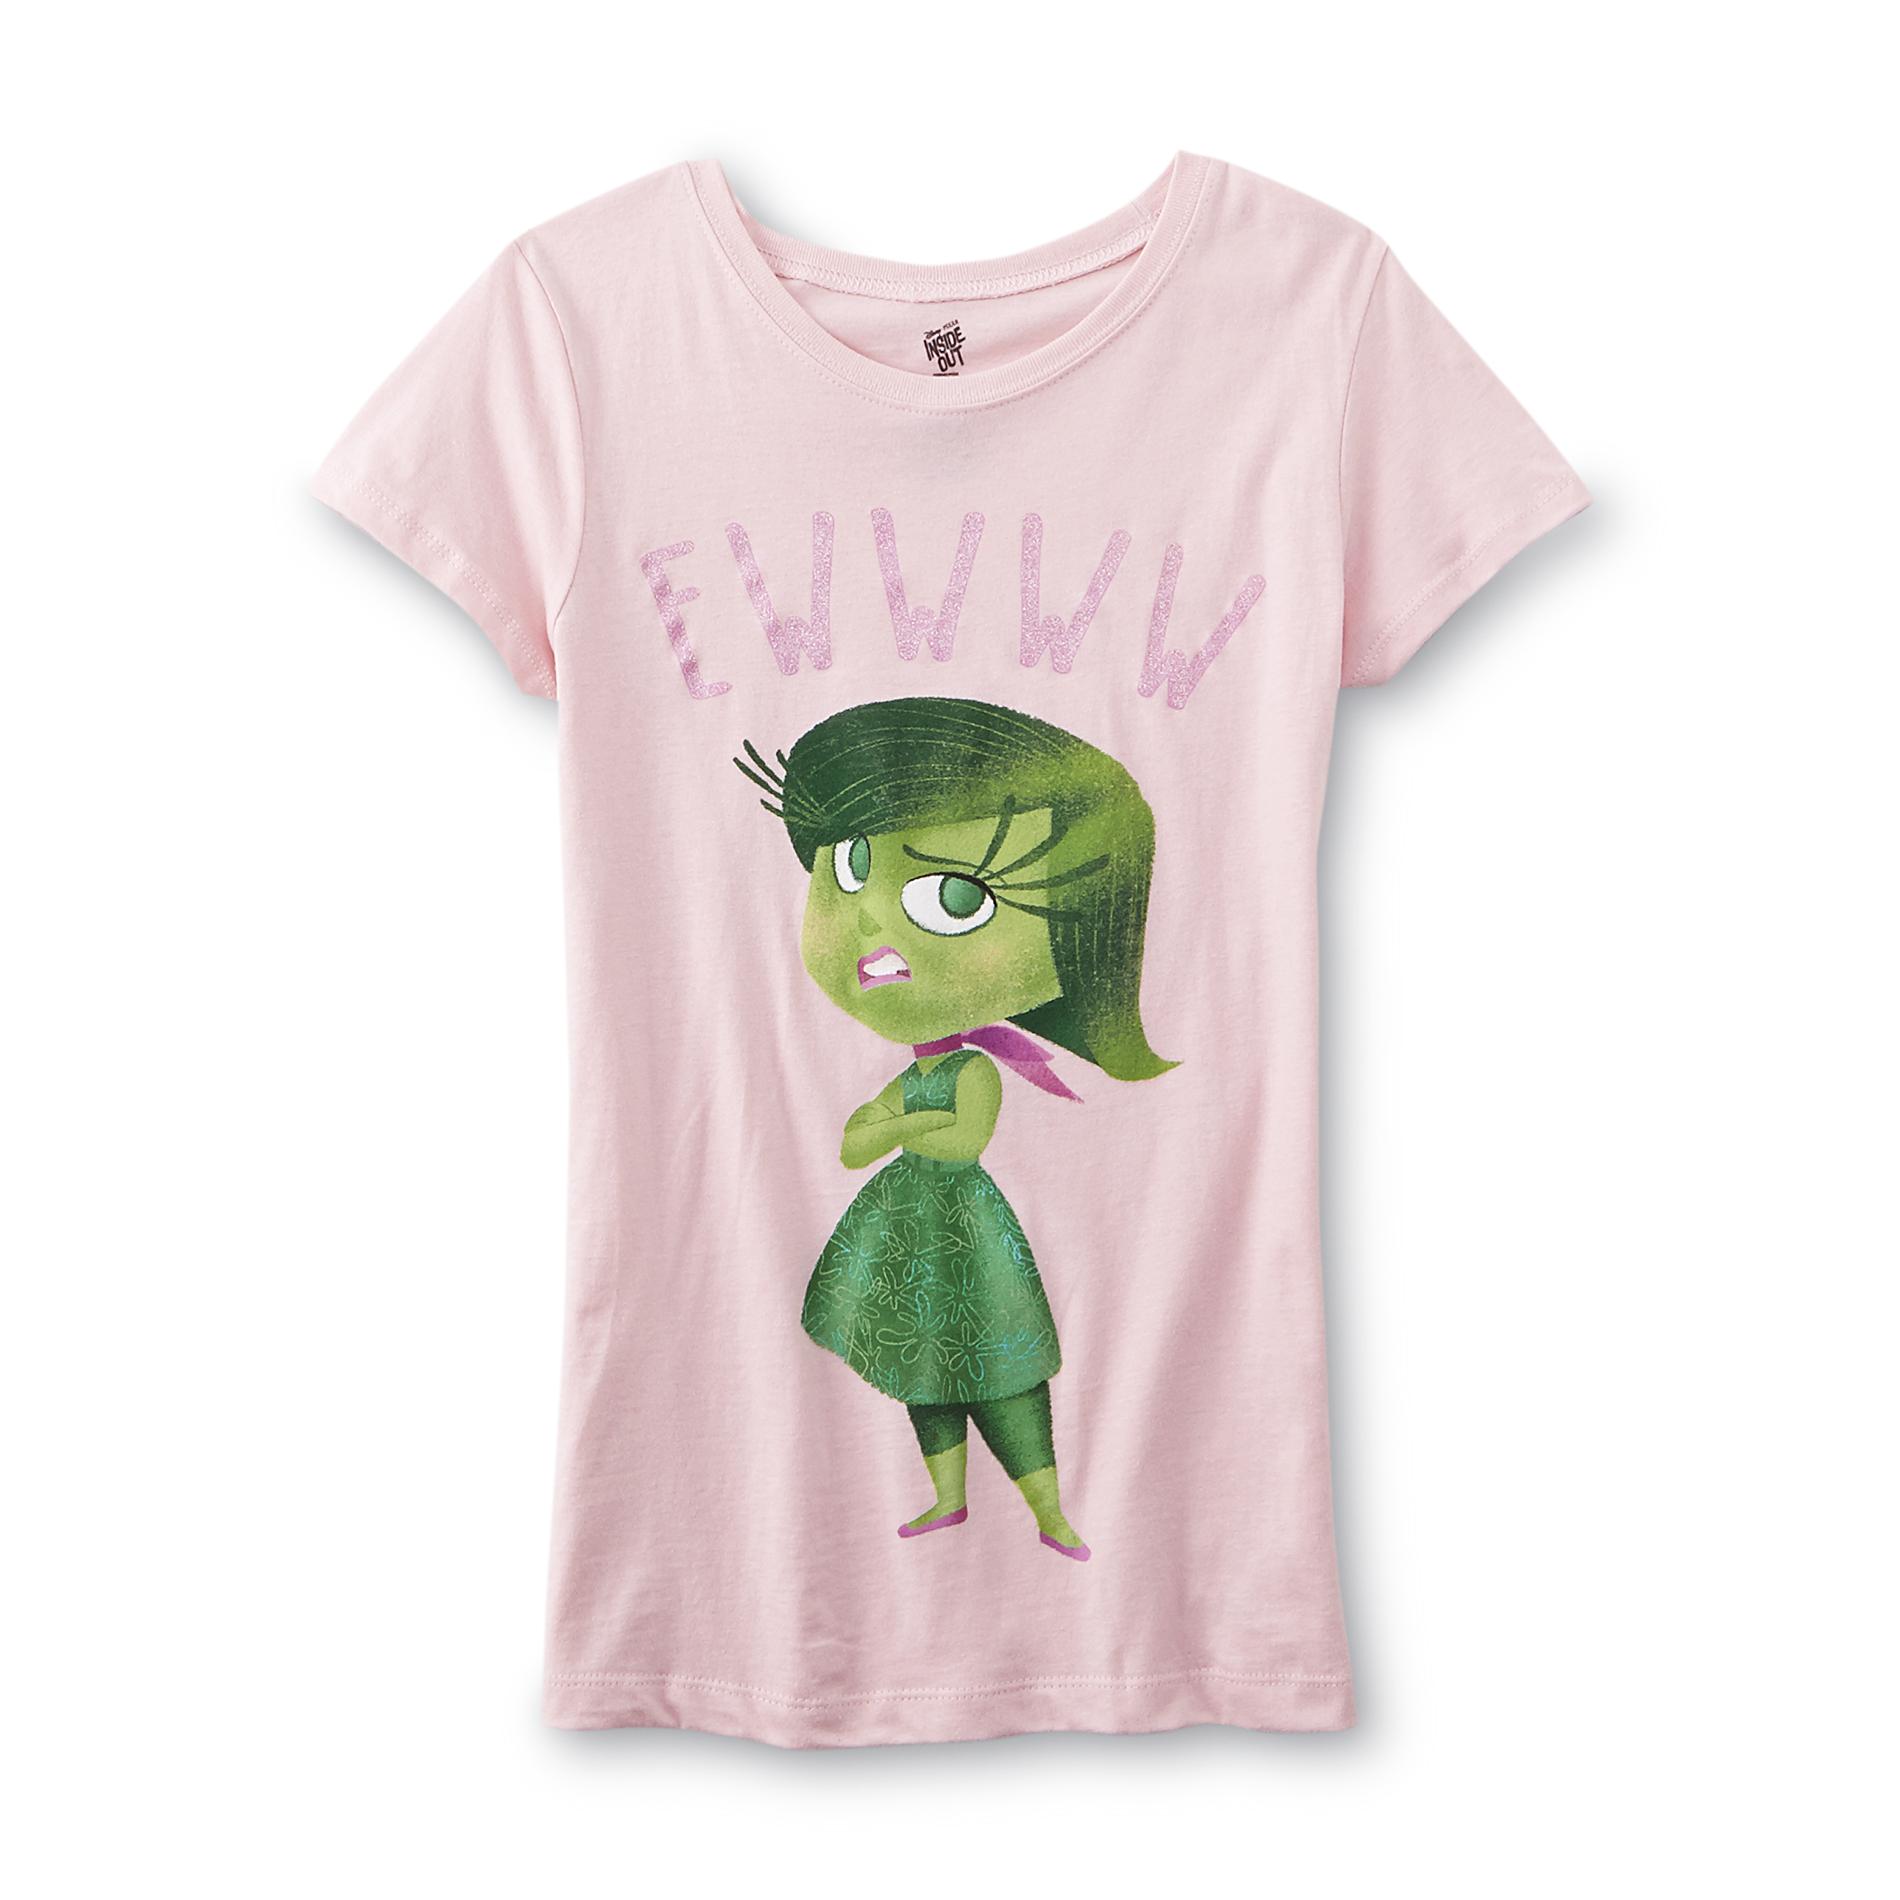 Disney Inside Out Girl's Graphic T-Shirt - Ewwww